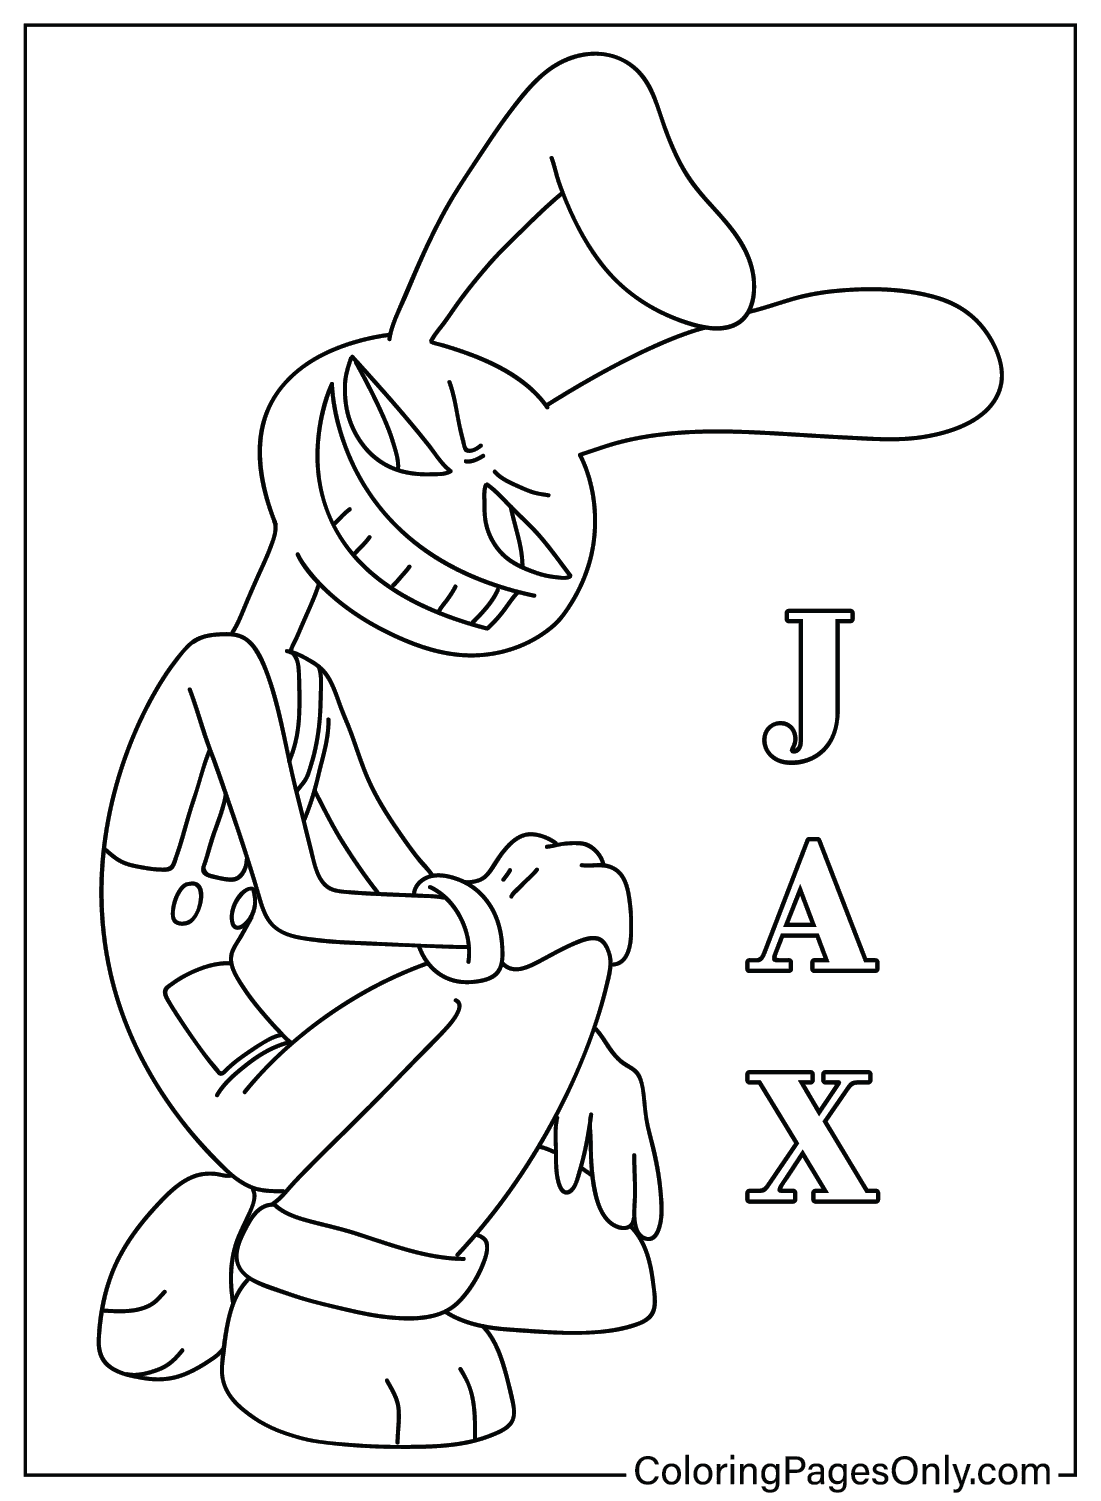 Coloring Page Jax from Jax